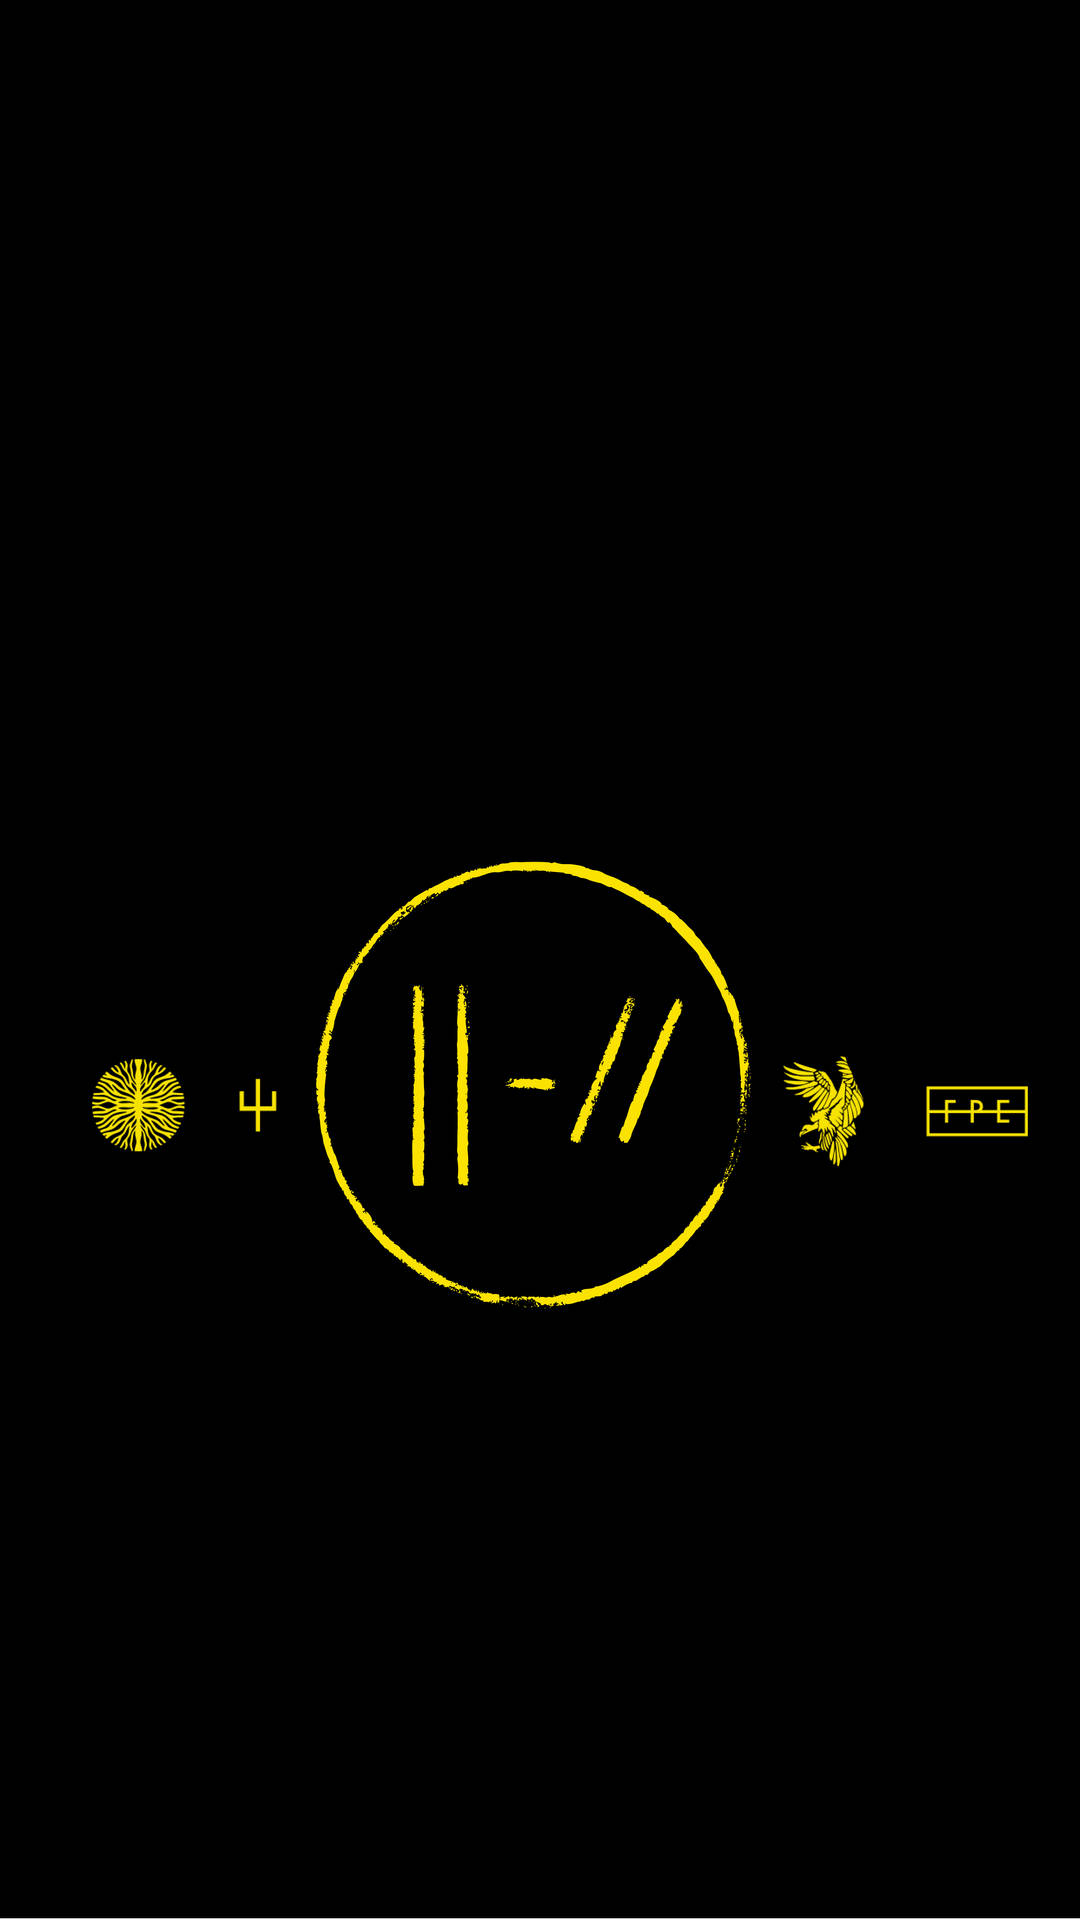 Step Into the "Trench" with Twenty One Pilots Wallpaper